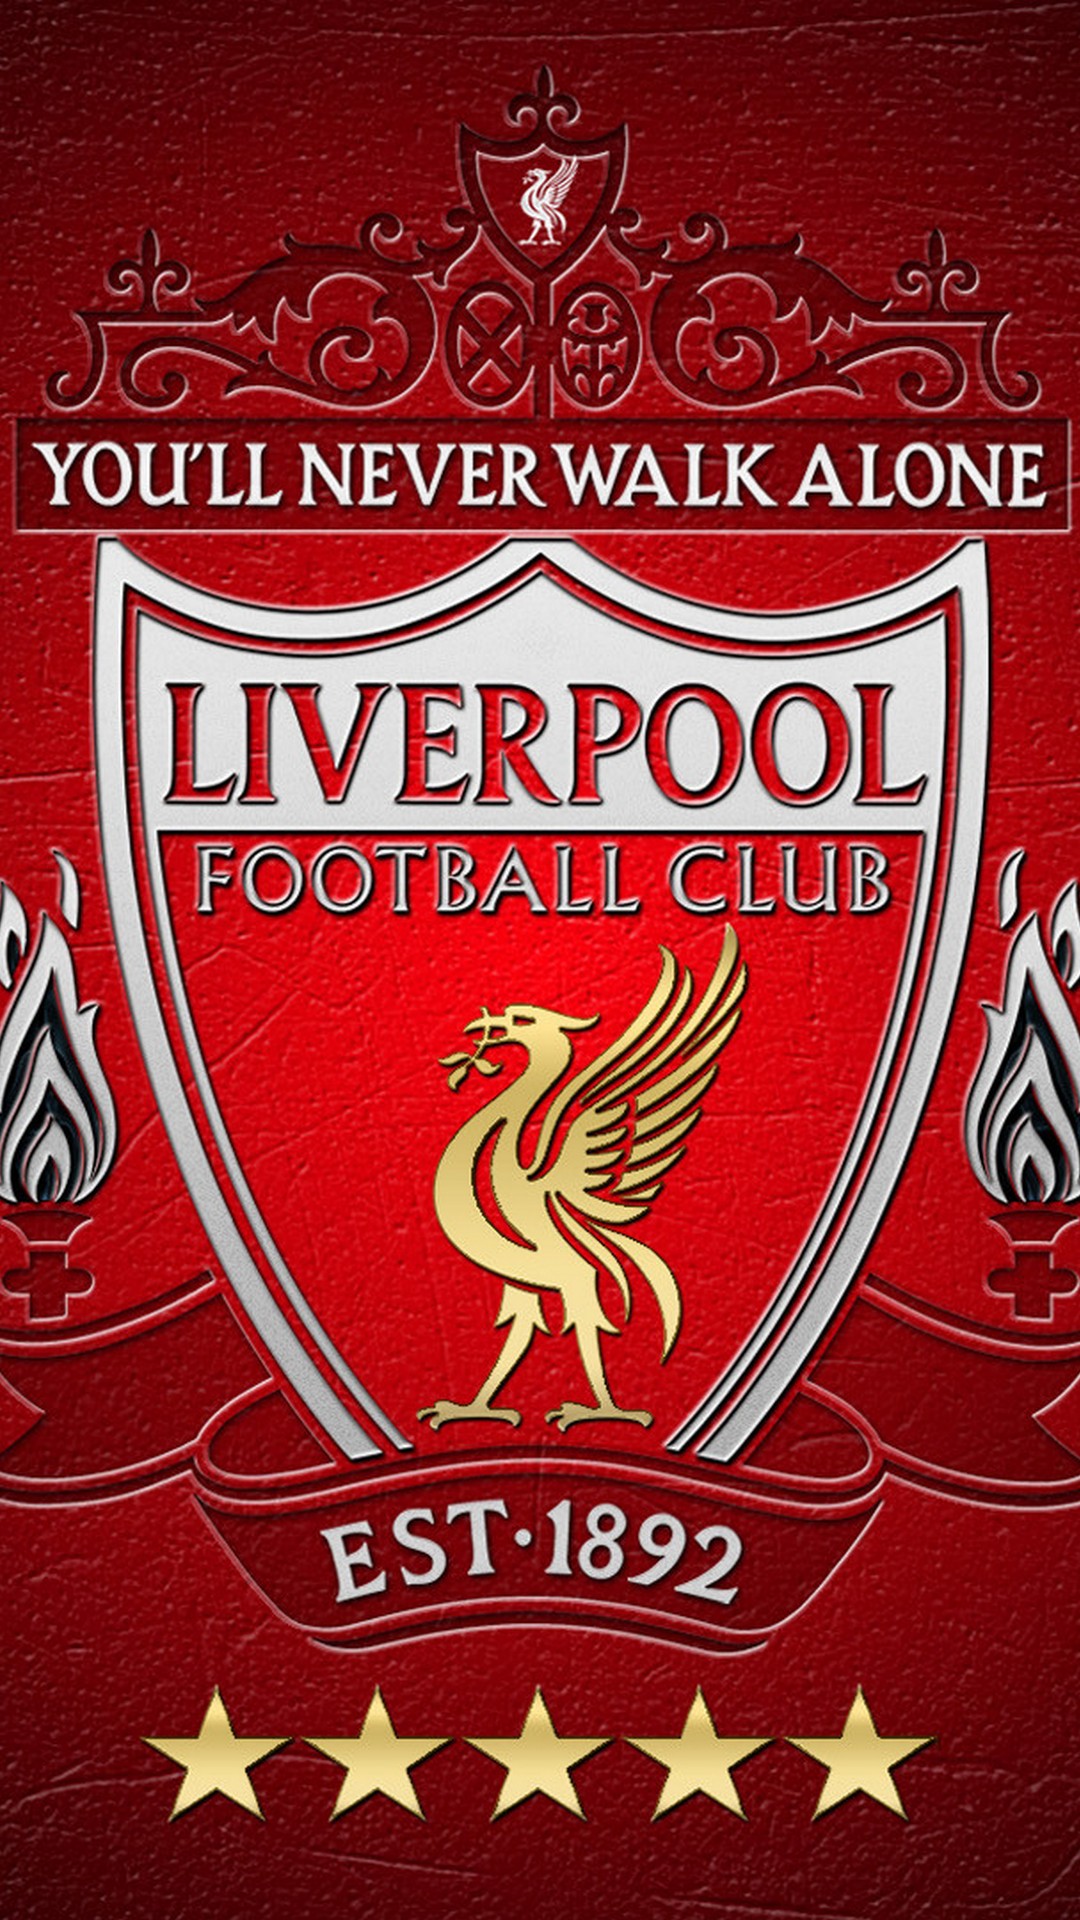 Wallpaper iPhone Liverpool With high-resolution 1080X1920 pixel. You can use this wallpaper for your iPhone 5, 6, 7, 8, X, XS, XR backgrounds, Mobile Screensaver, or iPad Lock Screen